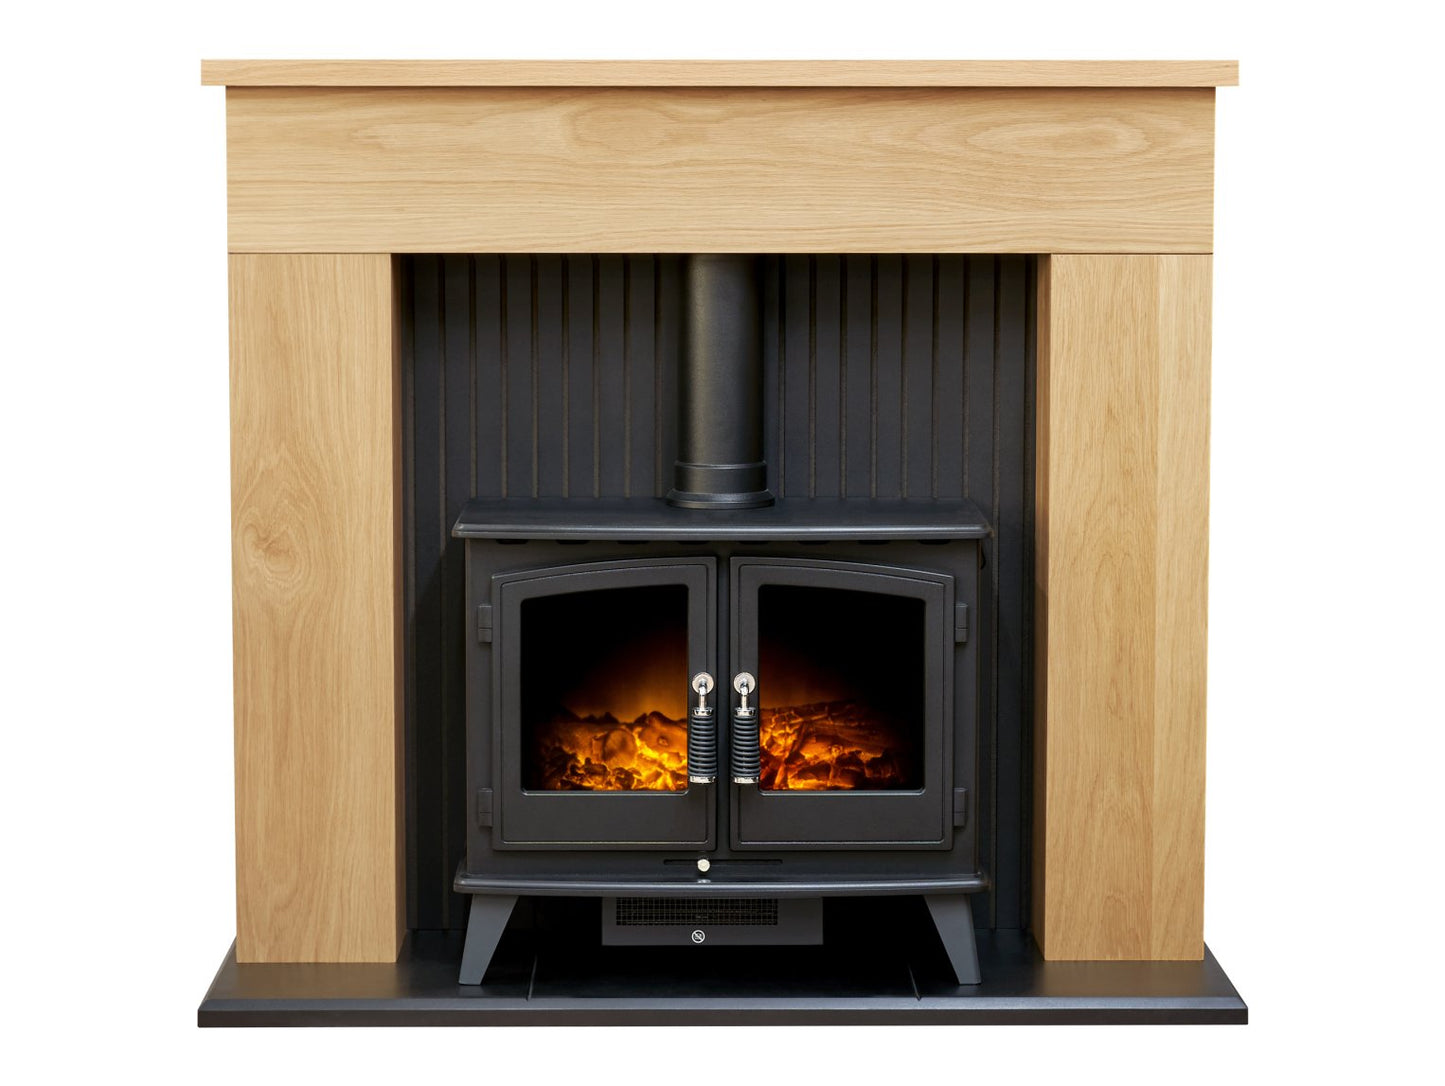 Adam Innsbruck Stove Fireplace in Oak with Woodhouse Electric Stove in Black, 48 Inch